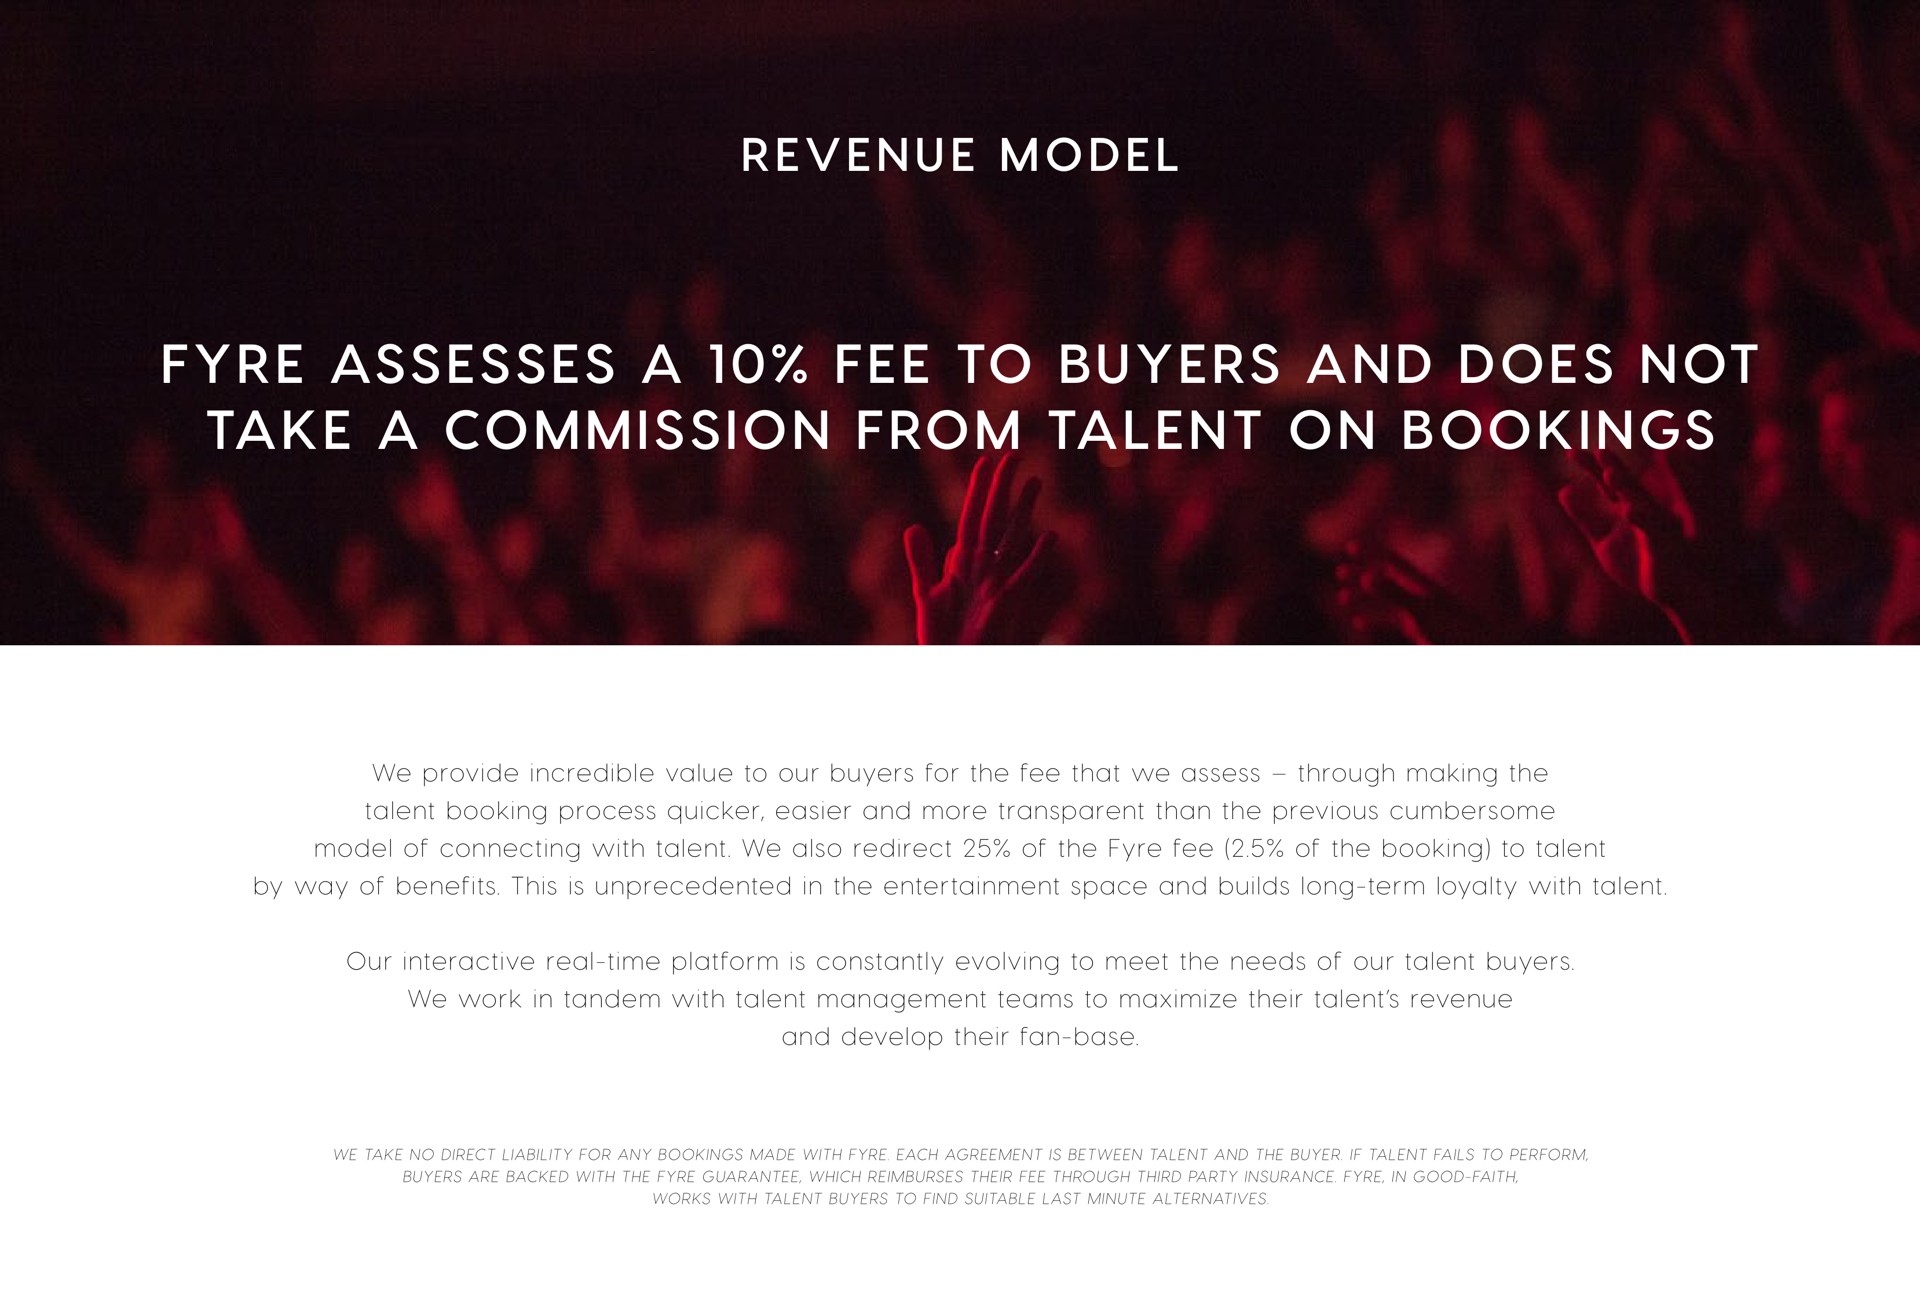 assesses a fee to buyers and does not take a commission from talent on bookings revenue model | Fyre